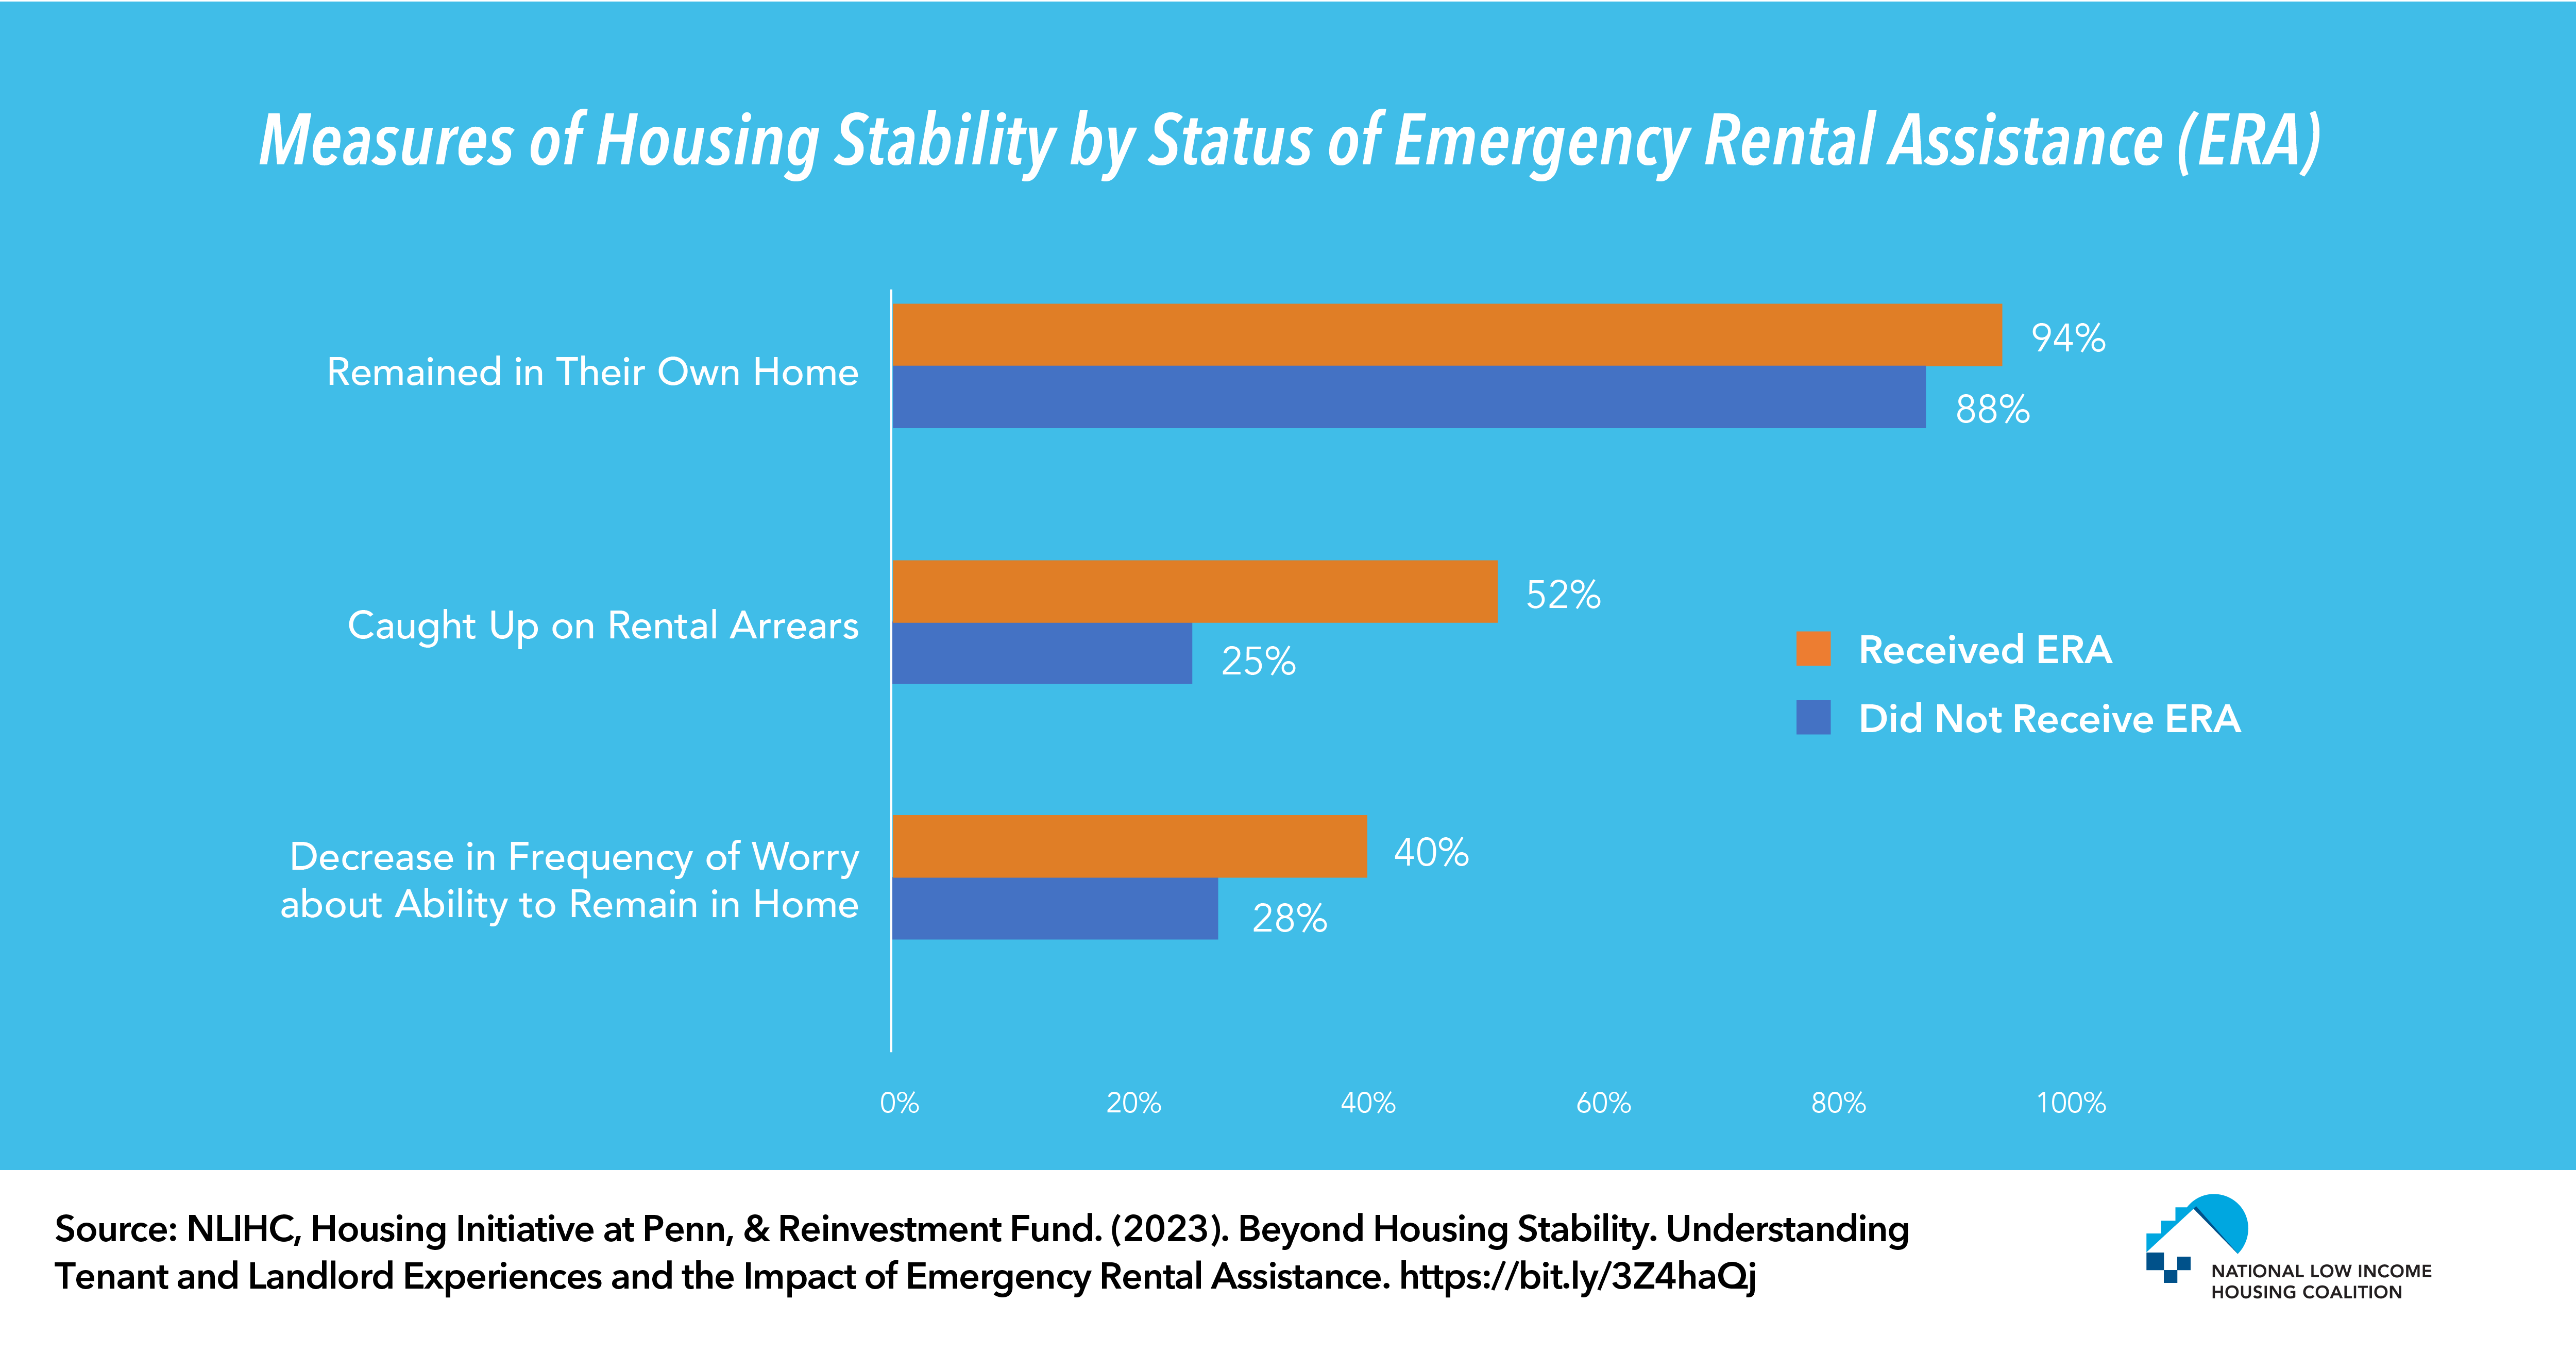 Measures of Housing Stability by Status of Emergency Rental Assistance